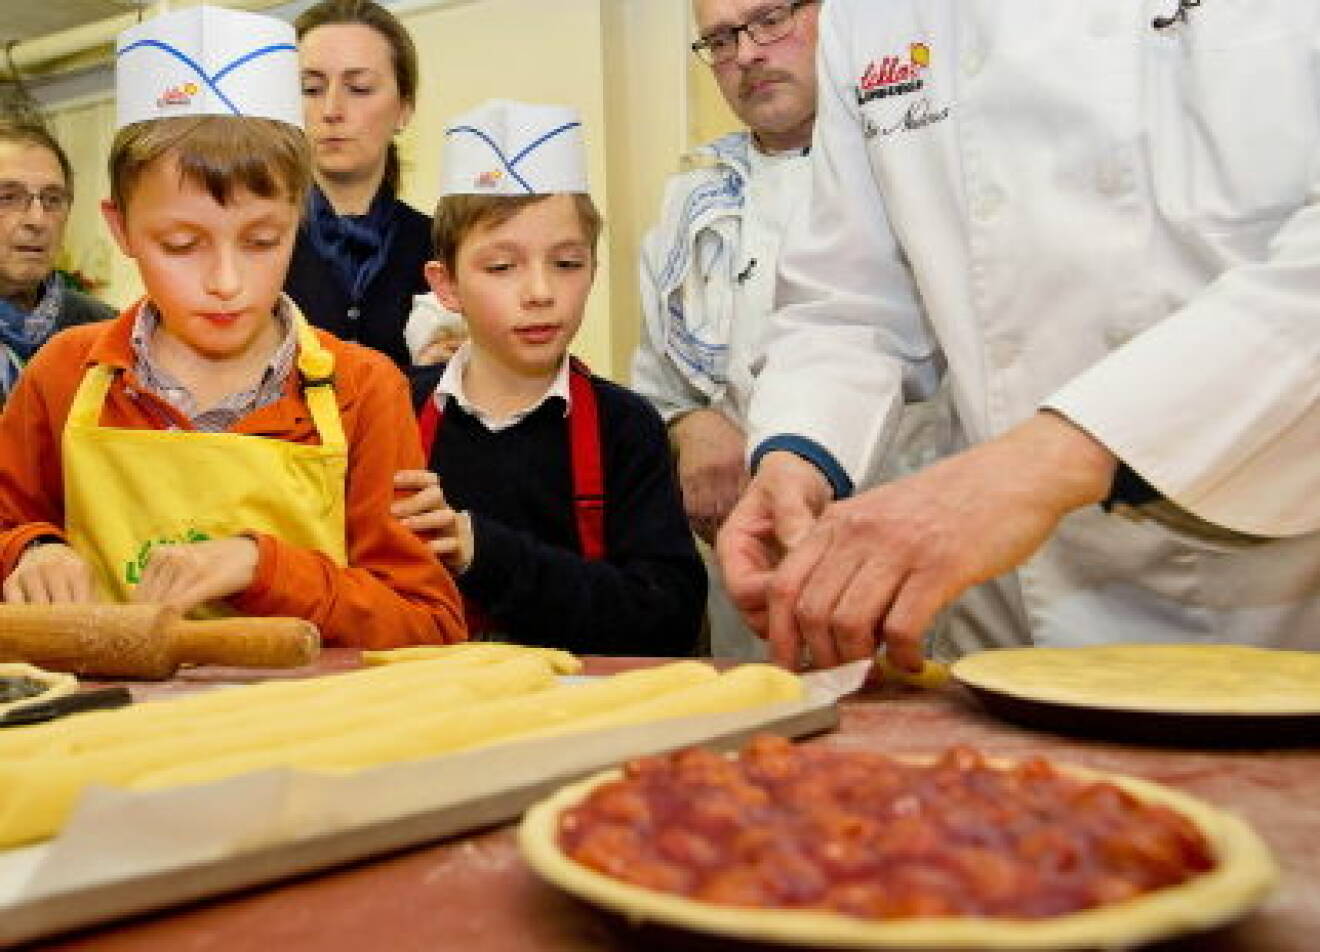 Belgium Prince Laurent, Princess Claire, Prince Nicolas and Prince Aymeric visits a bakery in belgium limburg for a a bake lesson of a Limburg pie and gingerbread of Hasselt